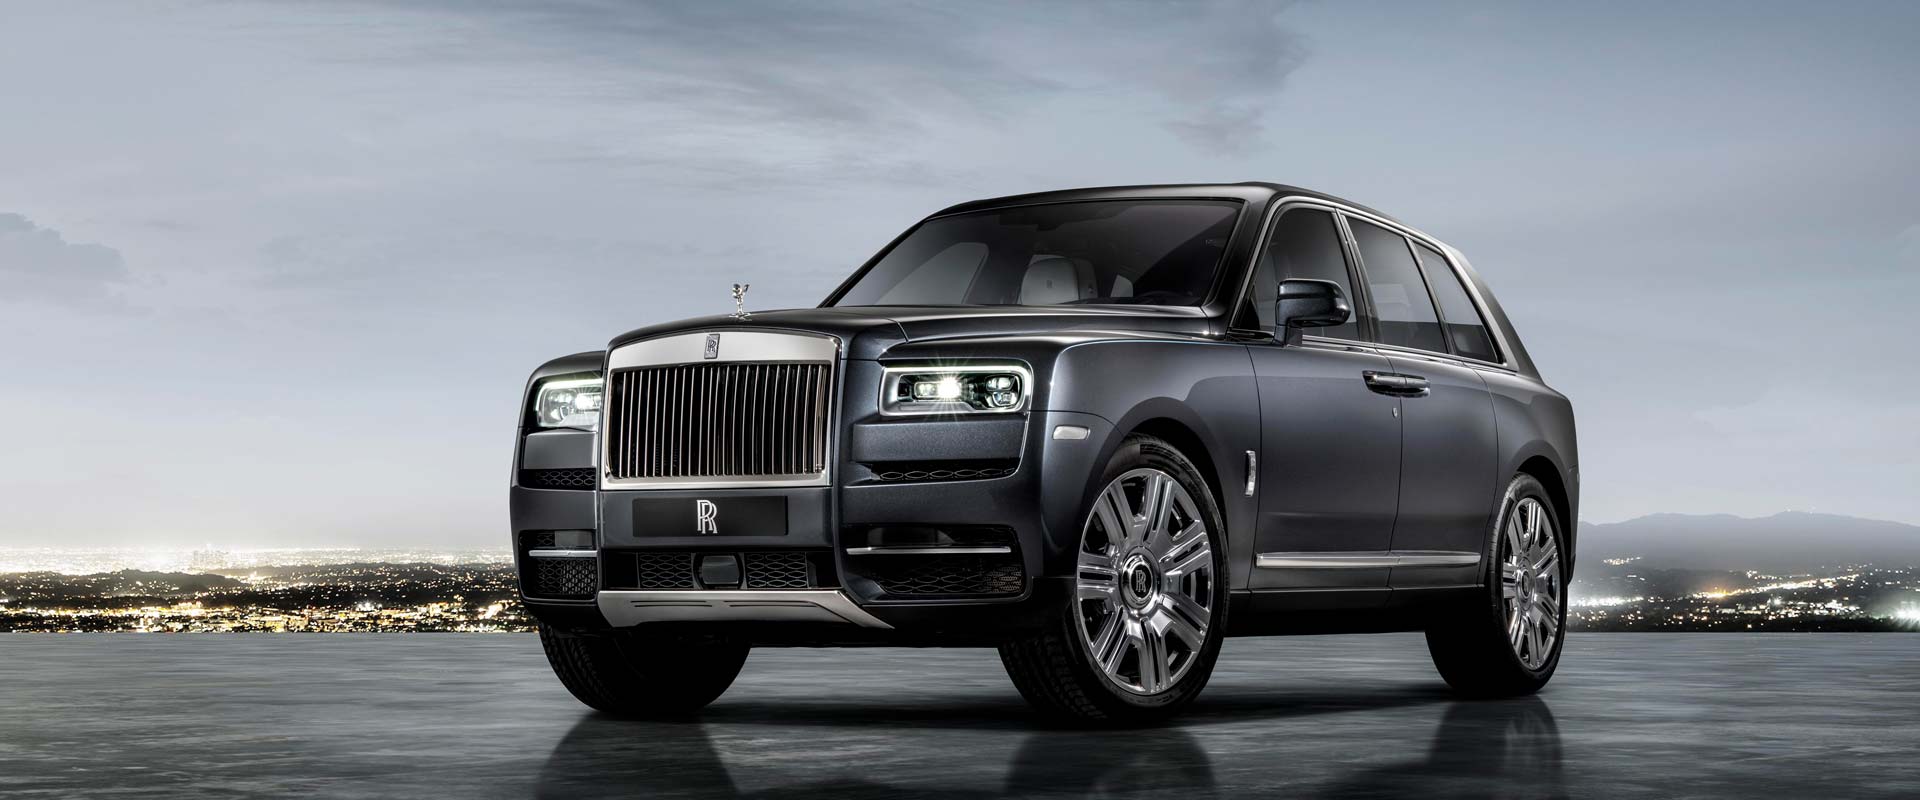 Cullinan: Quite literally the Rolls-Royce of SUVs